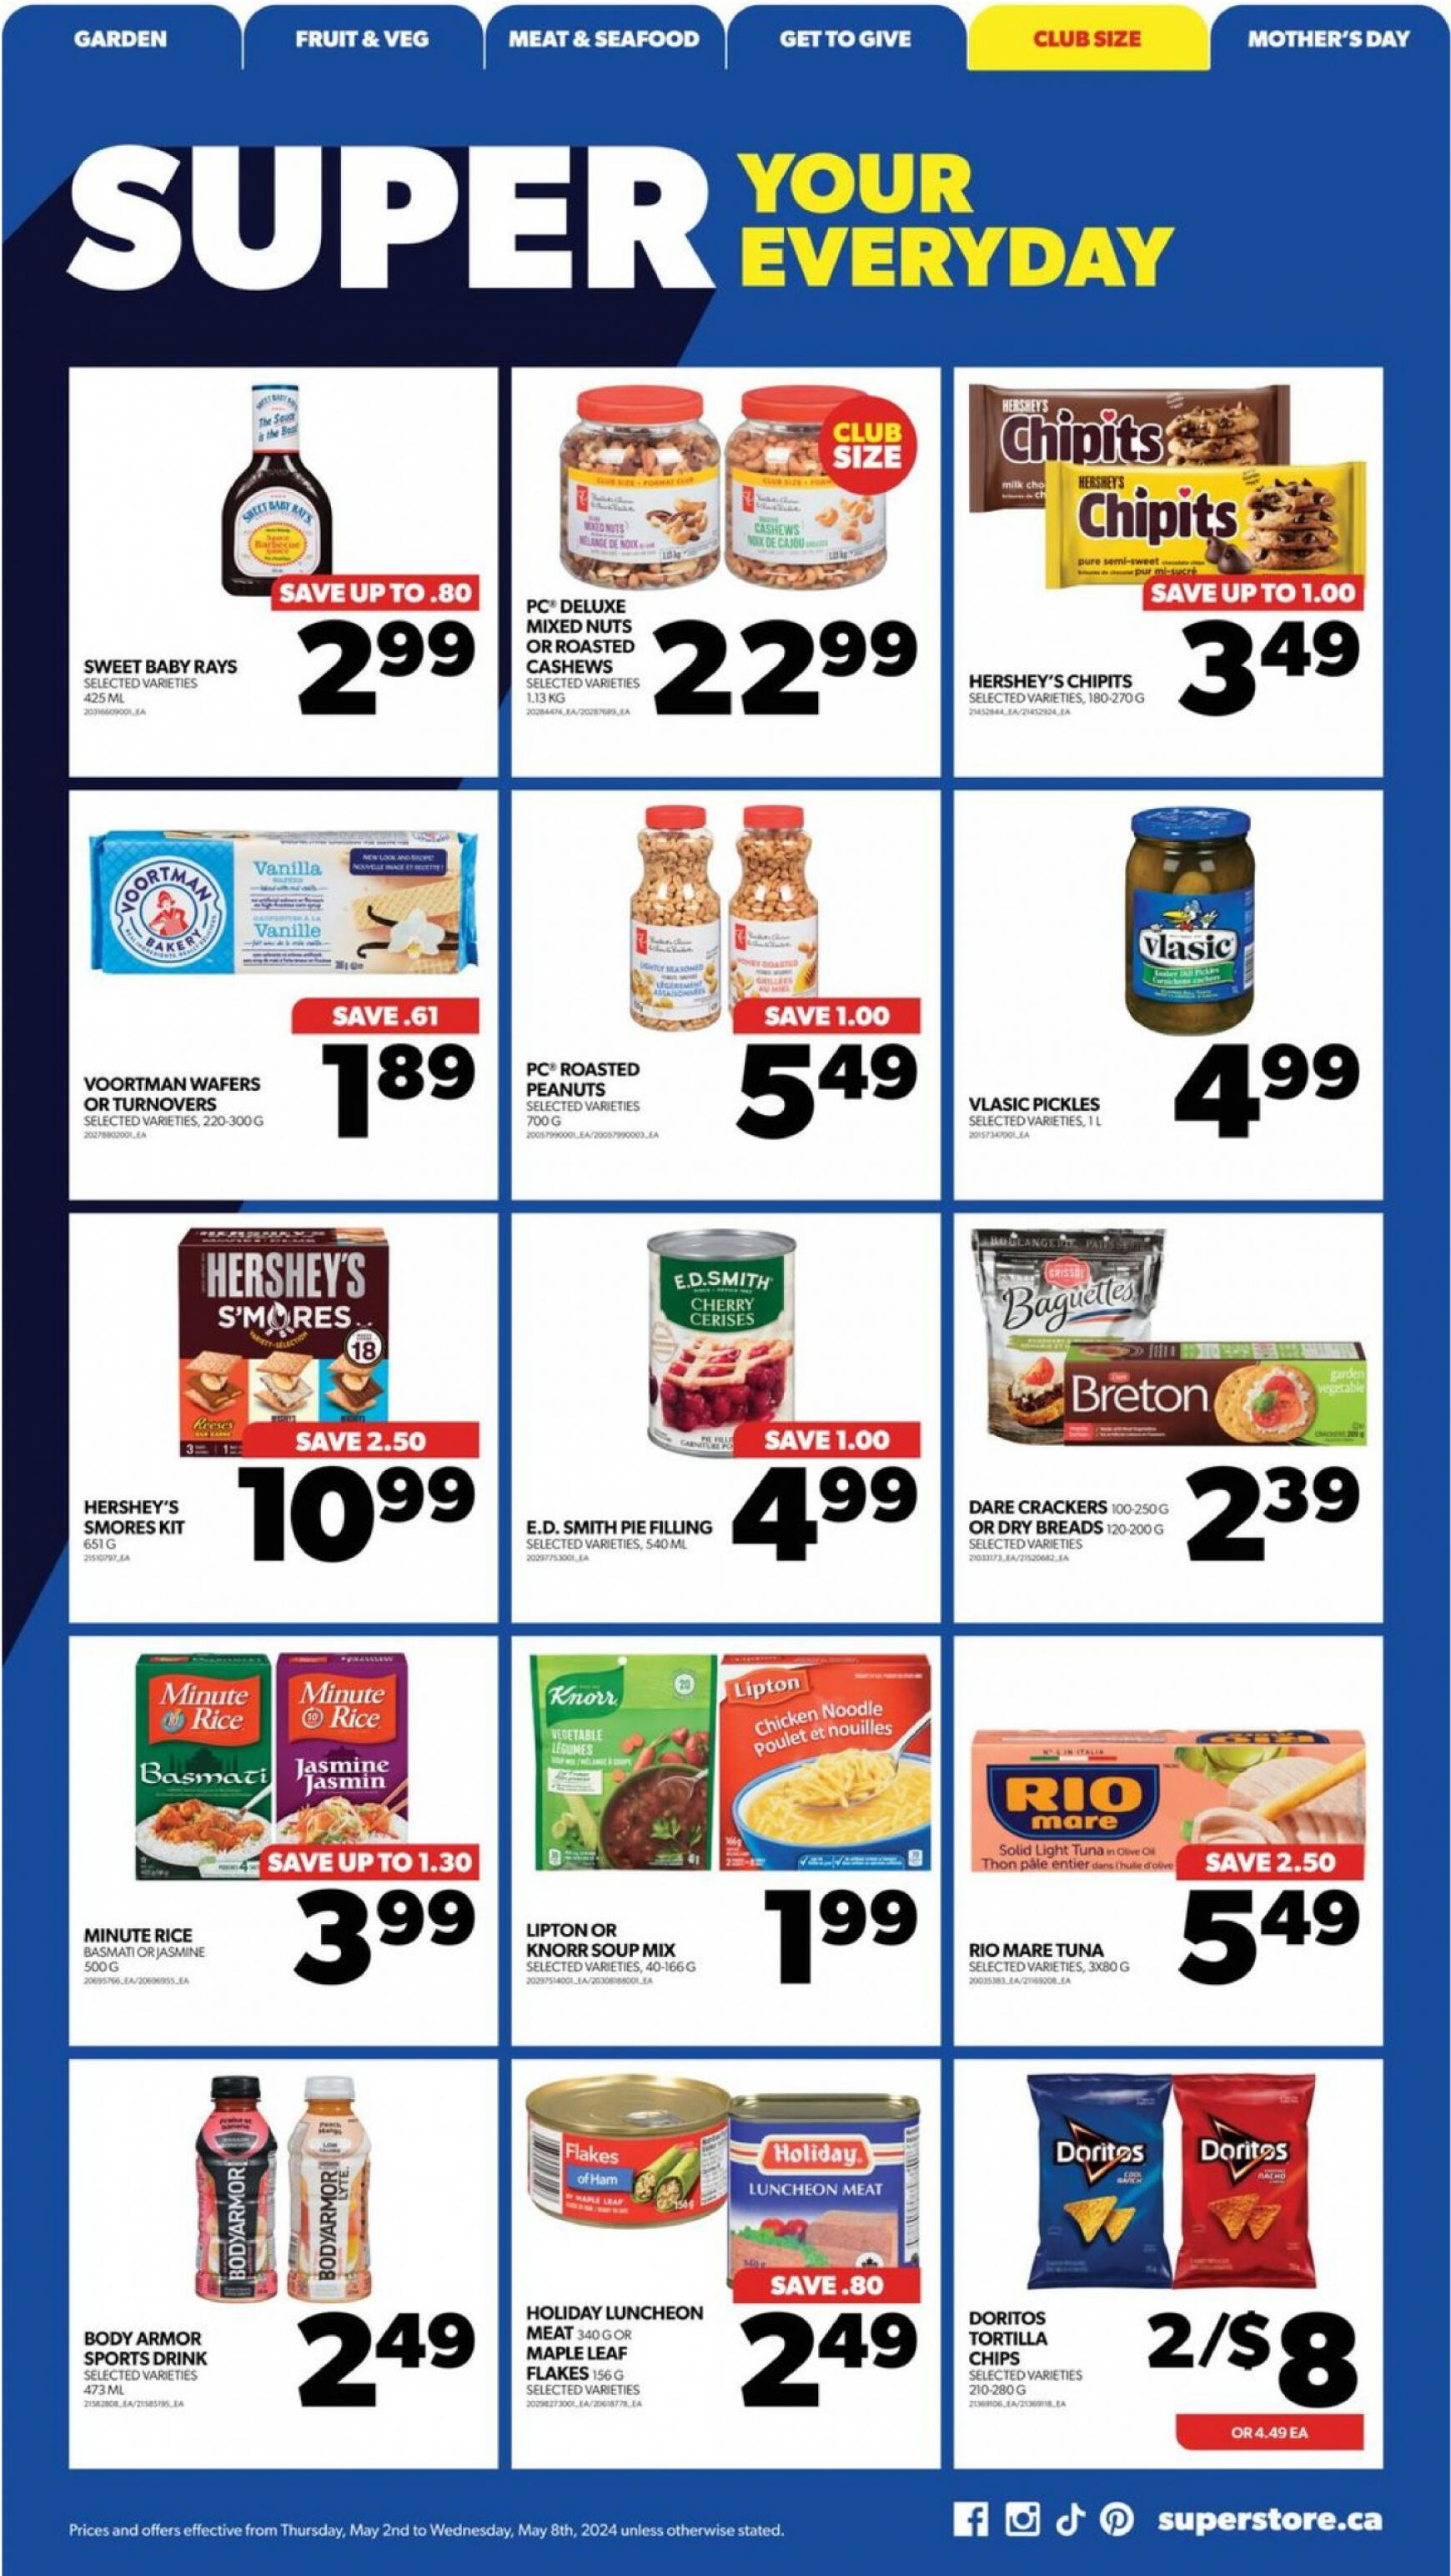 real-canadian-superstore - Real Canadian Superstore flyer current 02.05. - 08.05. - page: 20